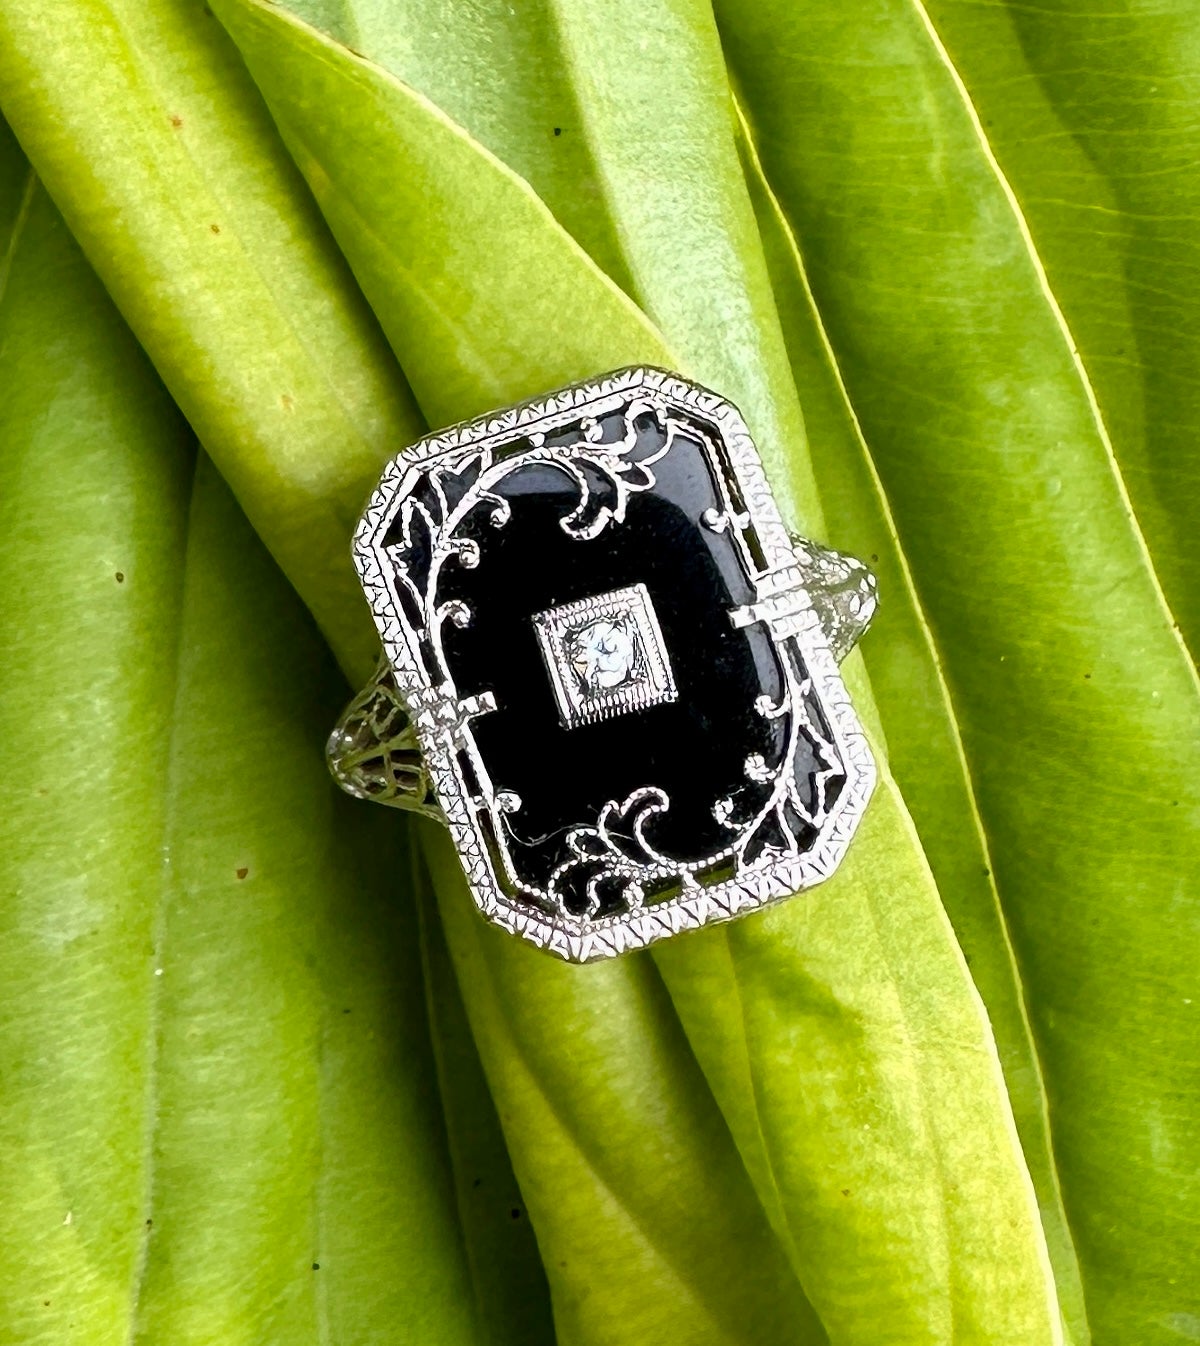 This is a very special Edwardian, Art Deco Ring with Black Onyx, a central Old Mine Cut Diamond and extraordinary 14 Karat White Gold filigree work across the top of the Black Onyx, around the stunning gallery and extending down the ring shank.  The